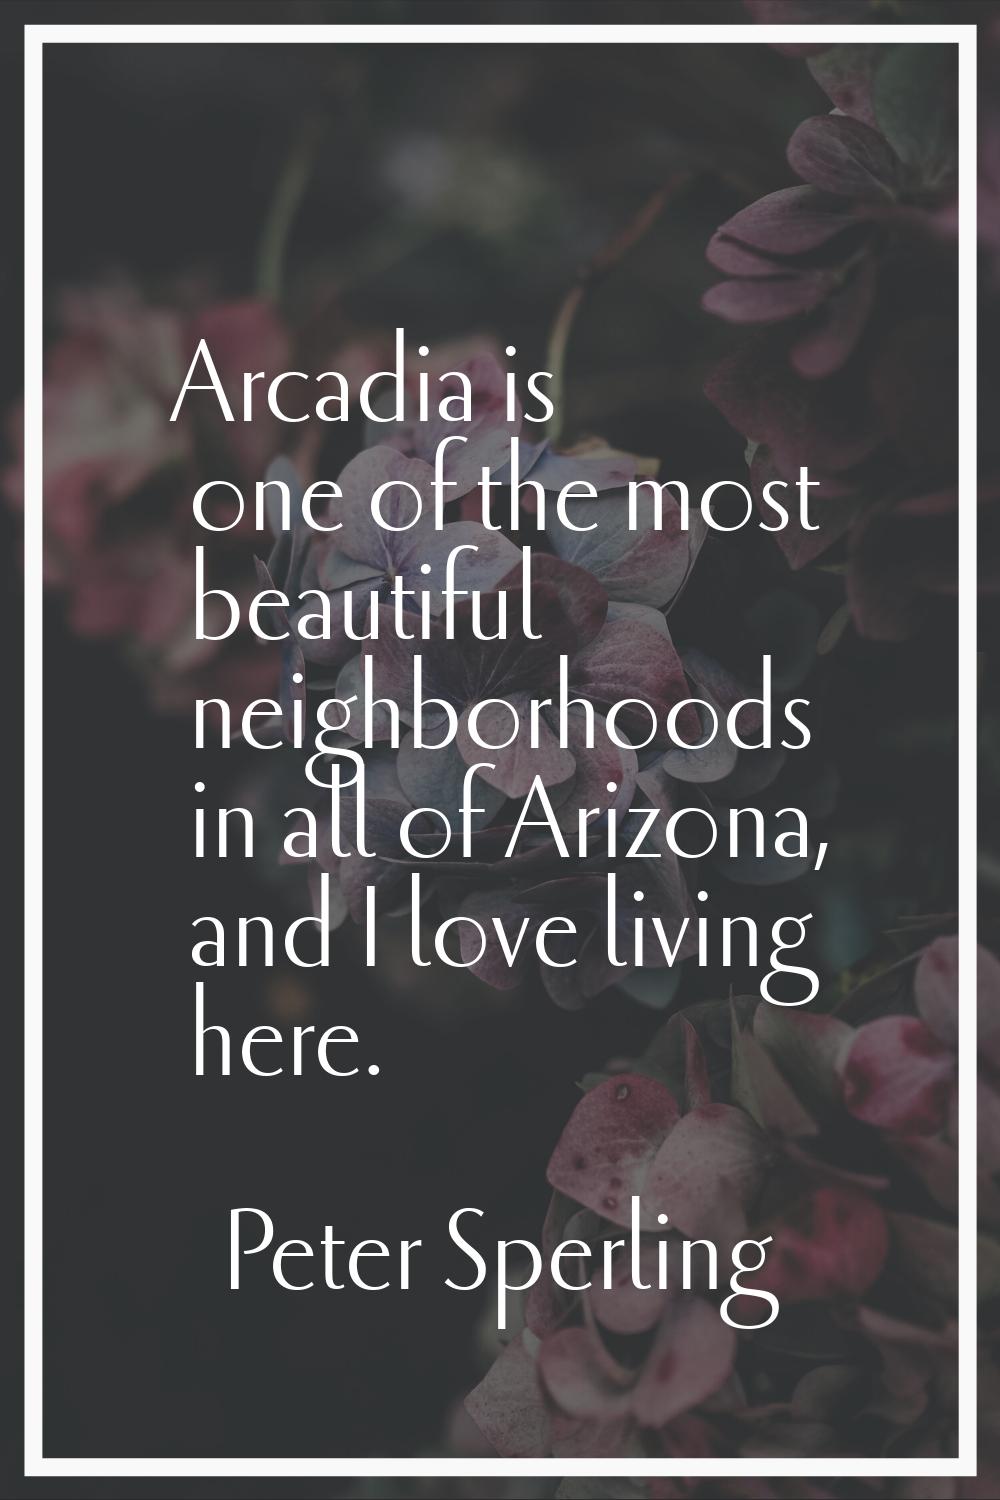 Arcadia is one of the most beautiful neighborhoods in all of Arizona, and I love living here.